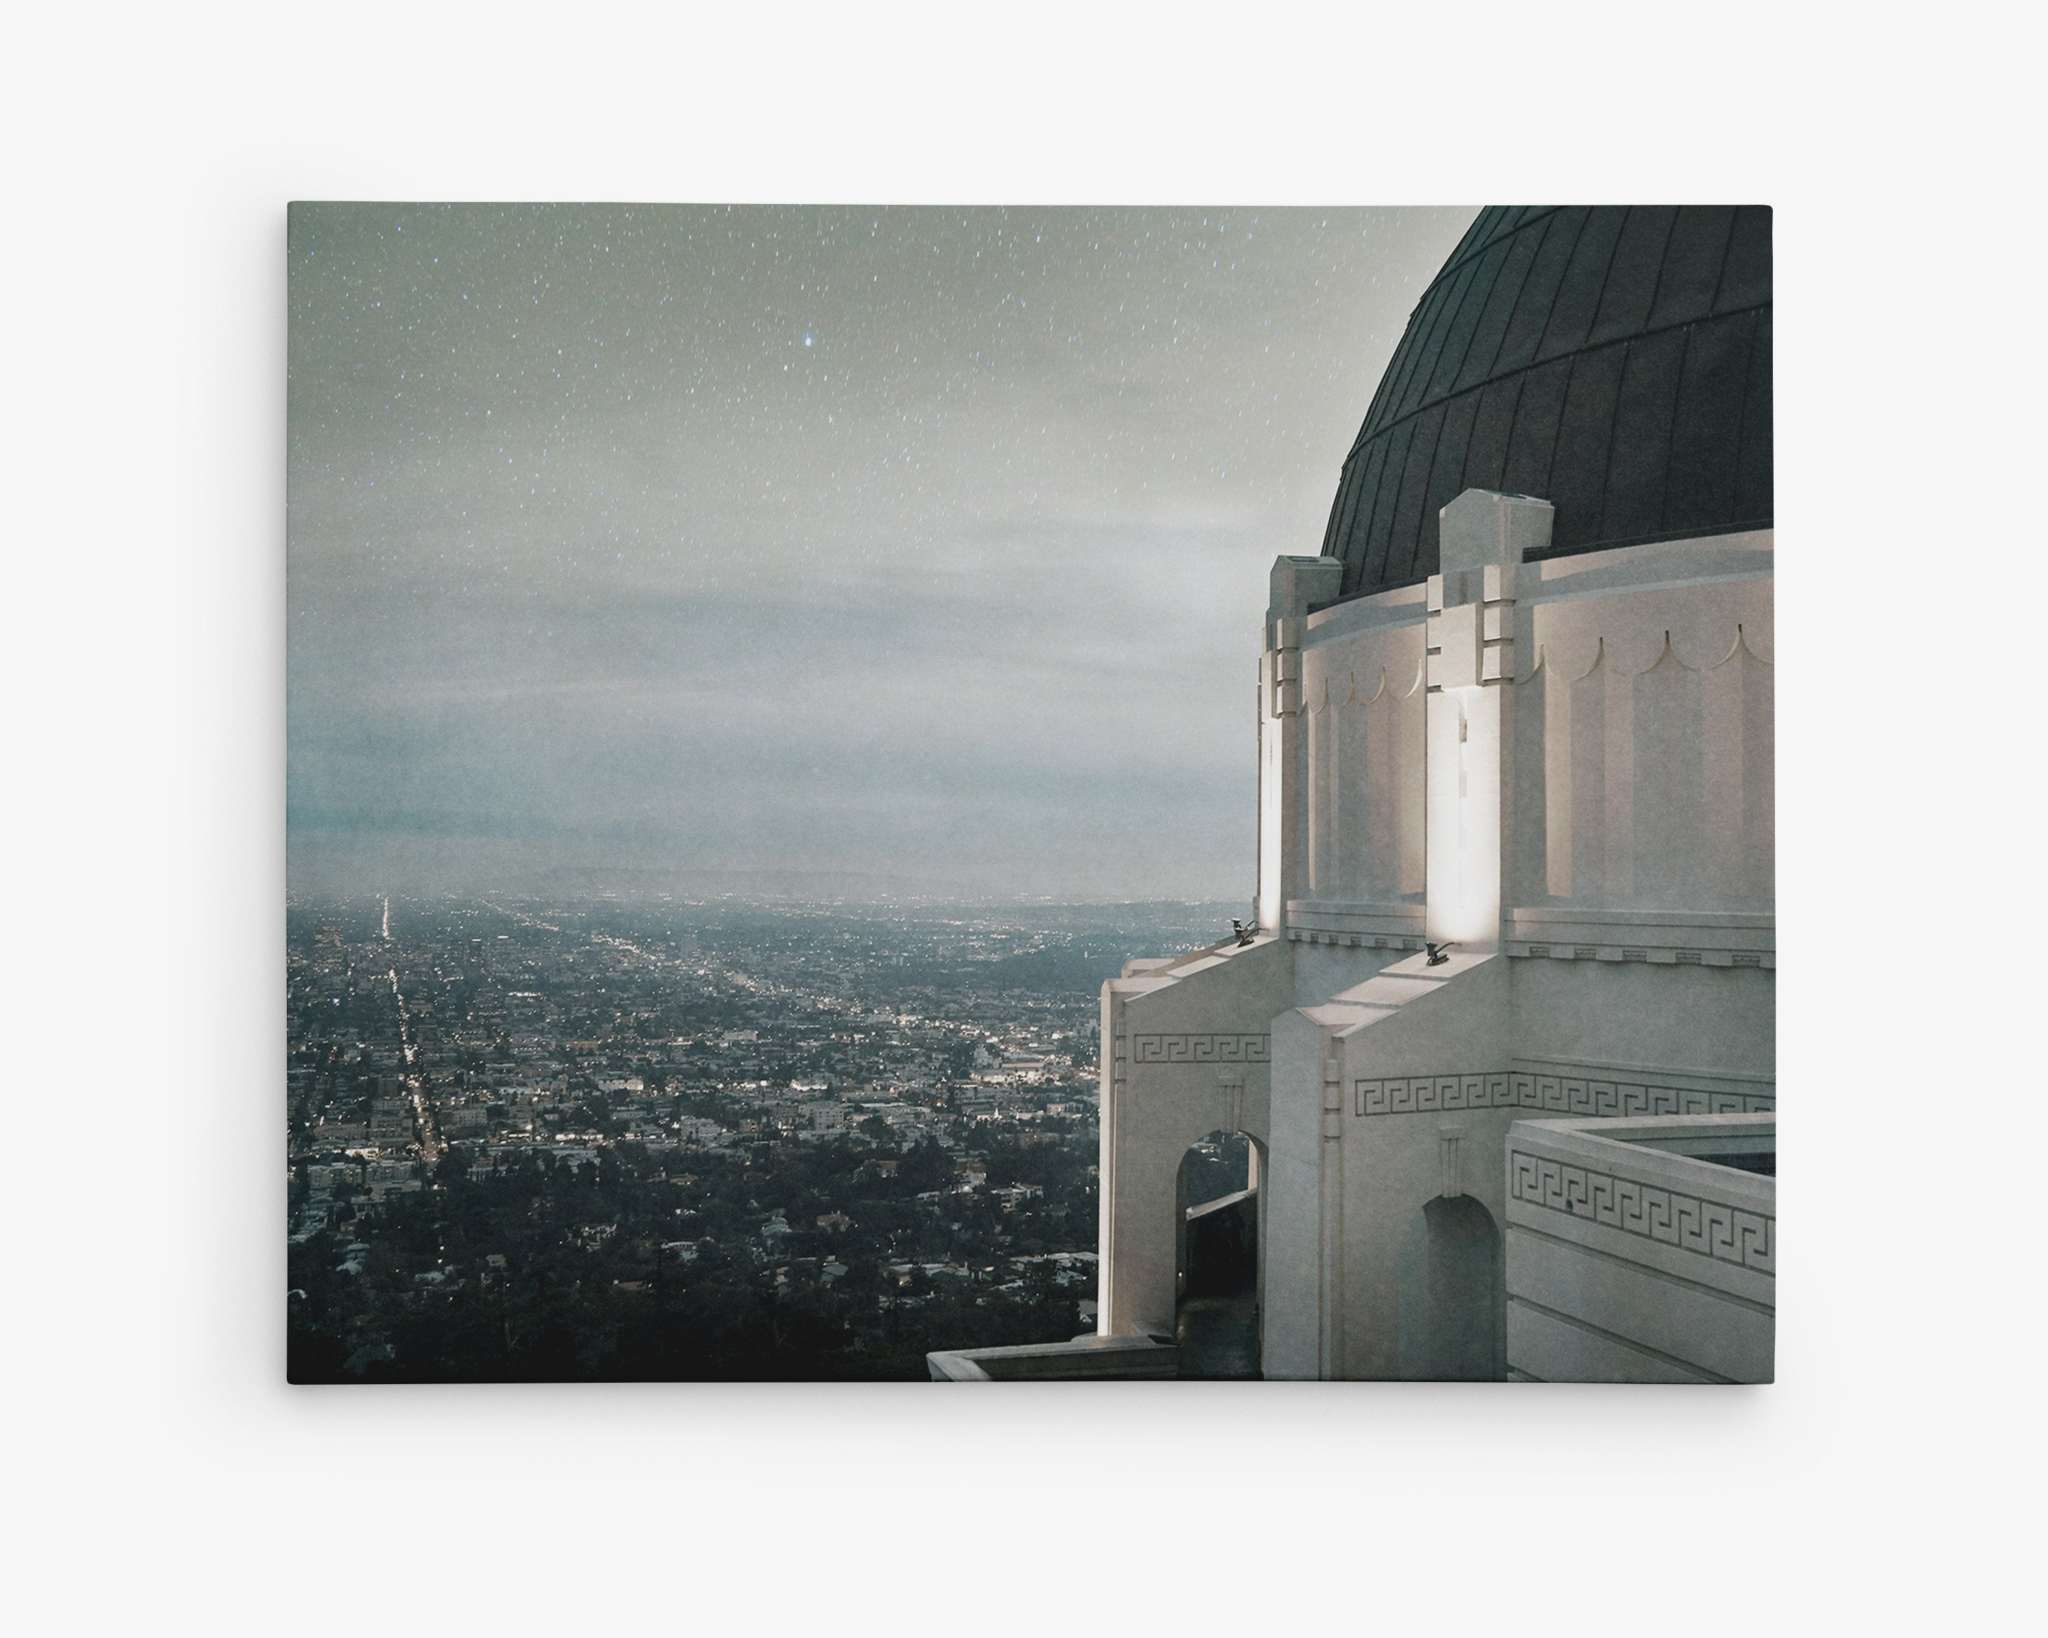 A nighttime City view of Los Angeles from the Griffith Observatory. The observatory&#39;s structure is visible on the right, partially illuminated, with the sprawling city lights stretching out below under a starry sky. The horizon is hazy, blending into the night. Perfect for Offley Green&#39;s Los Angeles Griffith Observatory Canvas Wall Decor, &#39;The Sky At Night&#39;.